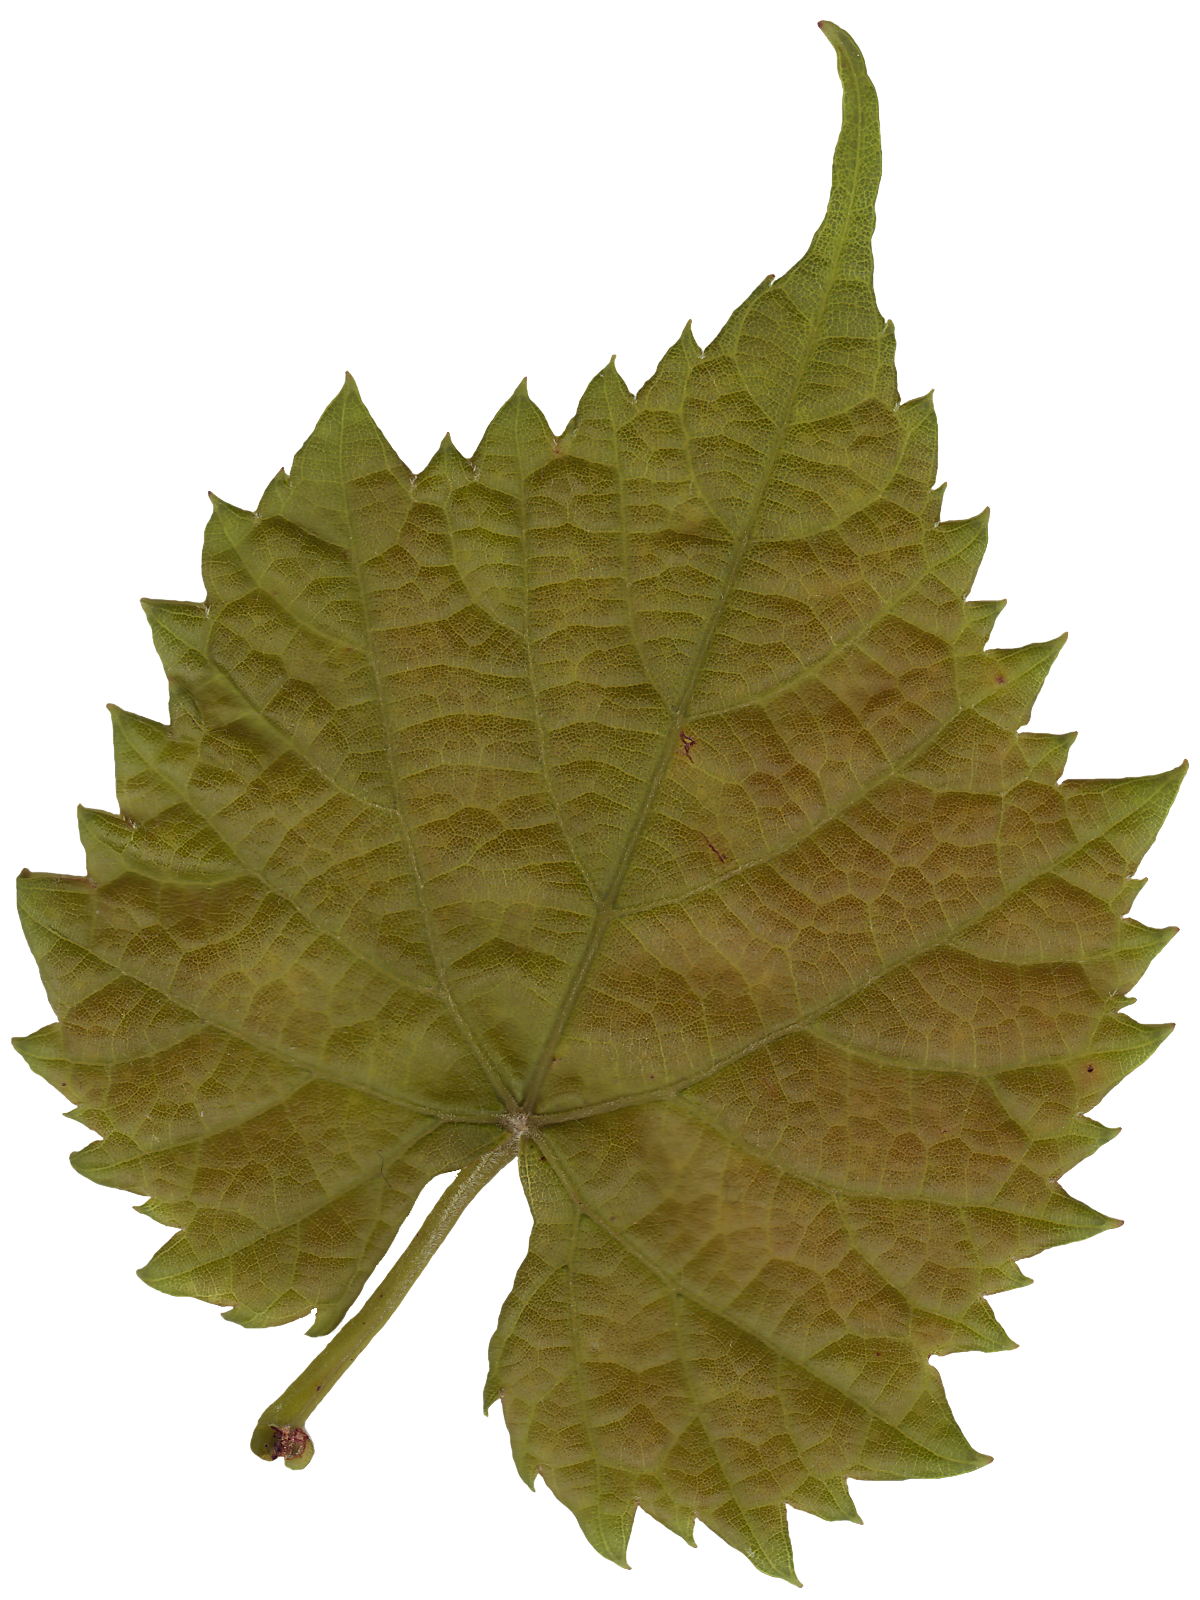 plant textures - leaf_03.png | OpenGameArt.org